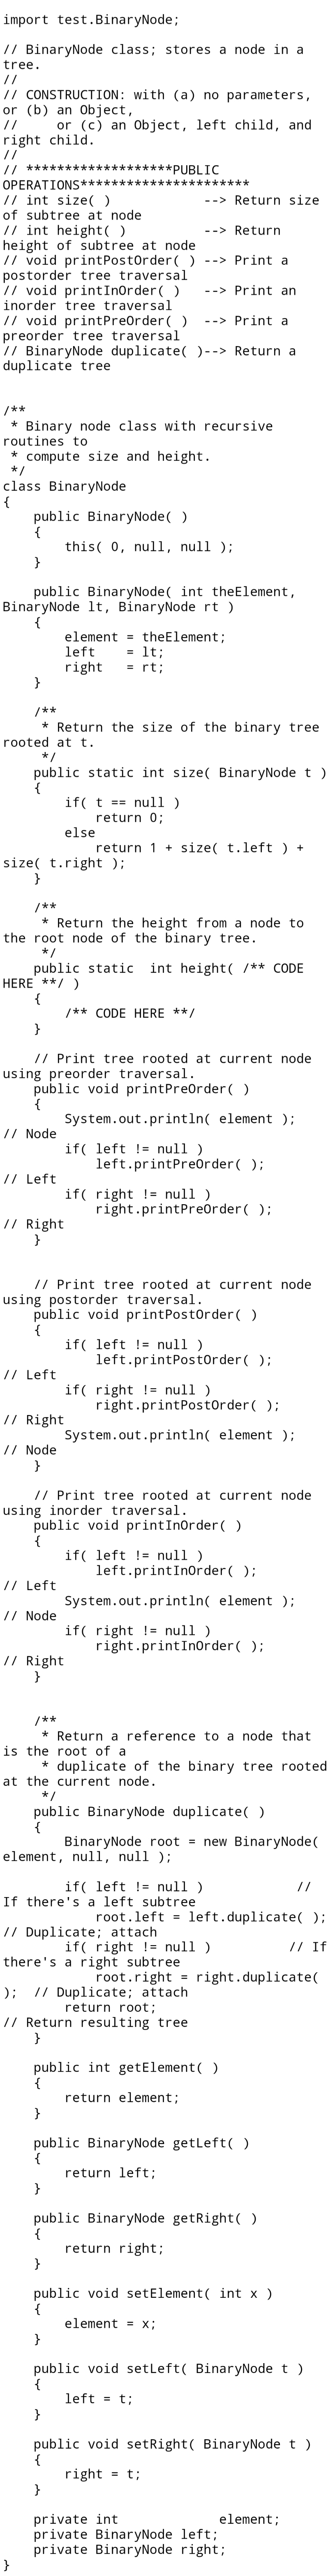 import test.BinaryNode;
// BinaryNode class; stores a node in a
tree.
//
// CONSTRUCTION: with (a) no parameters,
or (b) an 0bject,
//
or (c) an Object, left child, and
right child.
//
// *****
***PUBLIC
OPERATIONS***
// int size( )
of subtree at node
// int height( )
height of subtree at node
// void printPostOrder( )
postorder tree traversal
// void printInorder( )
inorder tree traversal
t*****
--> Return size
--> Return
--> Print a
--> Print an
// void printPreOrder( )
preorder tree traversal
// BinaryNode duplicate( )--> Return a
duplicate tree
--> Print a
/**
* Binary node class with recursive
routines to
compute size and height.
*/
class BinaryNode
{
public BinaryNode( )
{
this( 0, null, null );
}
public BinaryNode( int theElement,
BinaryNode lt, BinaryNode rt )
{
element
theElement;
lt;
= rt;
%3D
left
%3D
right
}
%3D
/**
* Return the size of the binary tree
rooted at t.
치/
public static int size( BinaryNode t)
{
if( t ==
return 0;
null )
else
return 1 + size( t.left ) +
size( t.right );
}
/**
* Return the height from a node to
the root node of the binary tree.
* /
public static int height( /** CODE
HERE **/ )
{
/** CODE HERE **/
}
// Print tree rooted at current node
using preorder traversal.
public void printPreOrder( )
{
System.out.println( element );
// Node
if( left != null )
left.printPreOrder( );
// Left
if( right != null )
right.printPreOrder( );
// Right|
}
// Print tree rooted at current node
using postorder traversal.
public void printPostorder( )
{
if( left != null )
left.printPostorder( );
// Left
if( right != null )
right.printPostOrder( );
// Right|
System.out.println( element );
// Node
}
// Print tree rooted at current node
using inorder traversal.
public void printInorder (O
{
if( left != null )
left.printInOrder( );
// Left
System.out.println( element );
// Node
if( right != null )
right.printInOrder( );
// Right|
}
/**
* Return a reference to a node that
is the root of a
* duplicate of the binary tree rooted
at the current node.
*/
public BinaryNode duplicate( )
{
BinaryNode root =
element, null, null );
new BinaryNode(
if( left != null )
If there's a left subtree
//
root.left = left.duplicate( );
%3D
// Duplicate; attach
if( right != null )
there's a right subtree
// If
root.right = right.duplicate(
// Duplicate; attach
return root;
);
// Return resulting tree
}
public int getElement( )
{
return element;
}
public BinaryNode getLeft( )
{
return left;
}
public BinaryNode getRight(O
{
return right;
}
public
void setElement( int x )
{
element = x;
}
public void setleft( BinaryNode t )
{
left
t;
%3D
}
public void setRight( BinaryNode t )
{
right
}
= t;
private int
private BinaryNode left;
private BinaryNode right;
}
element;
